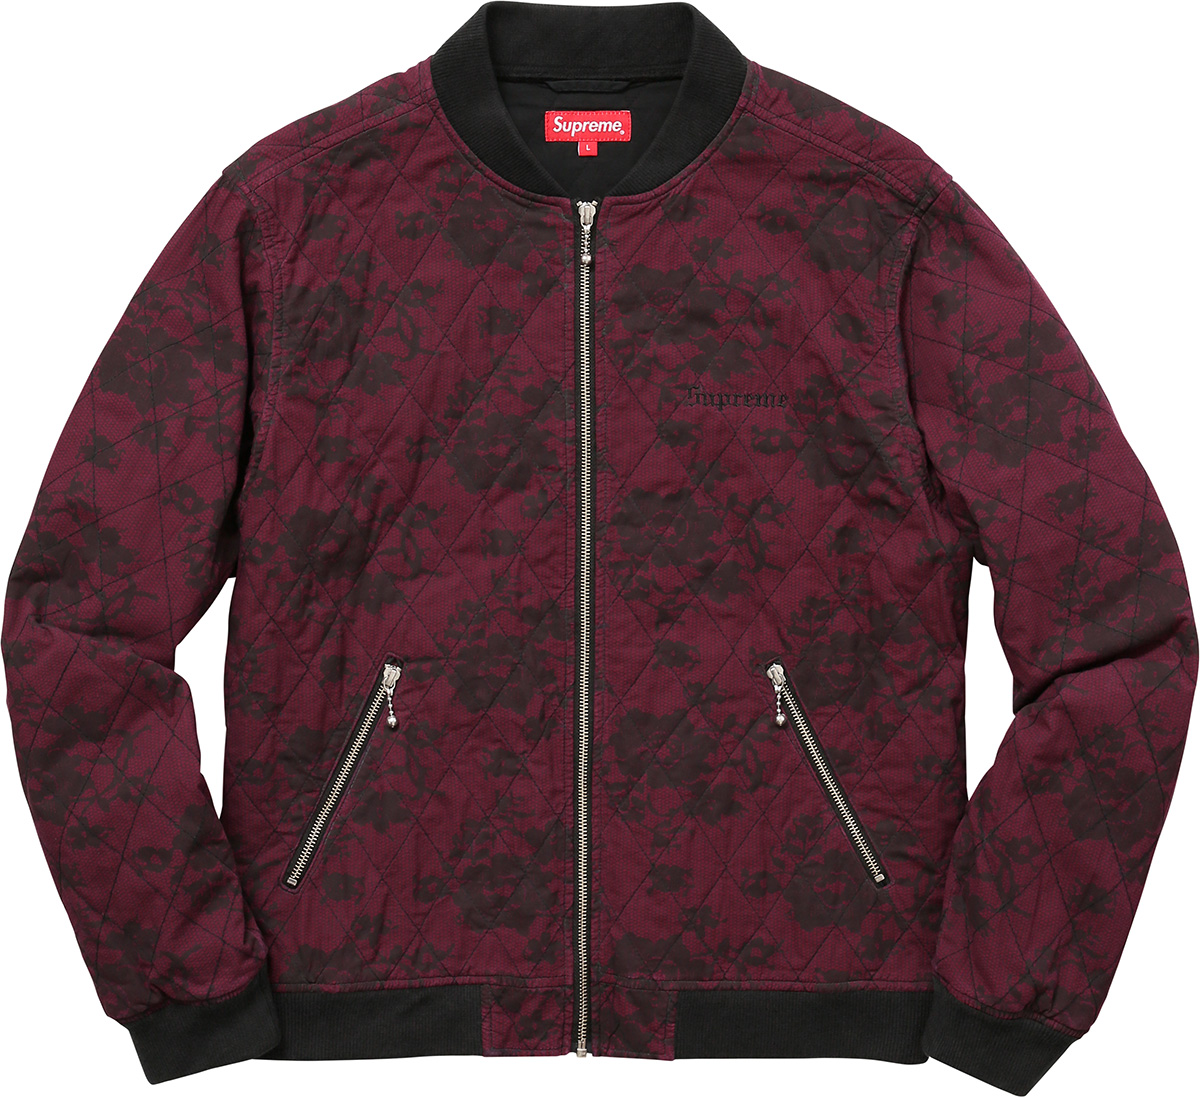 SupremeQuilted Lace BomberJacket